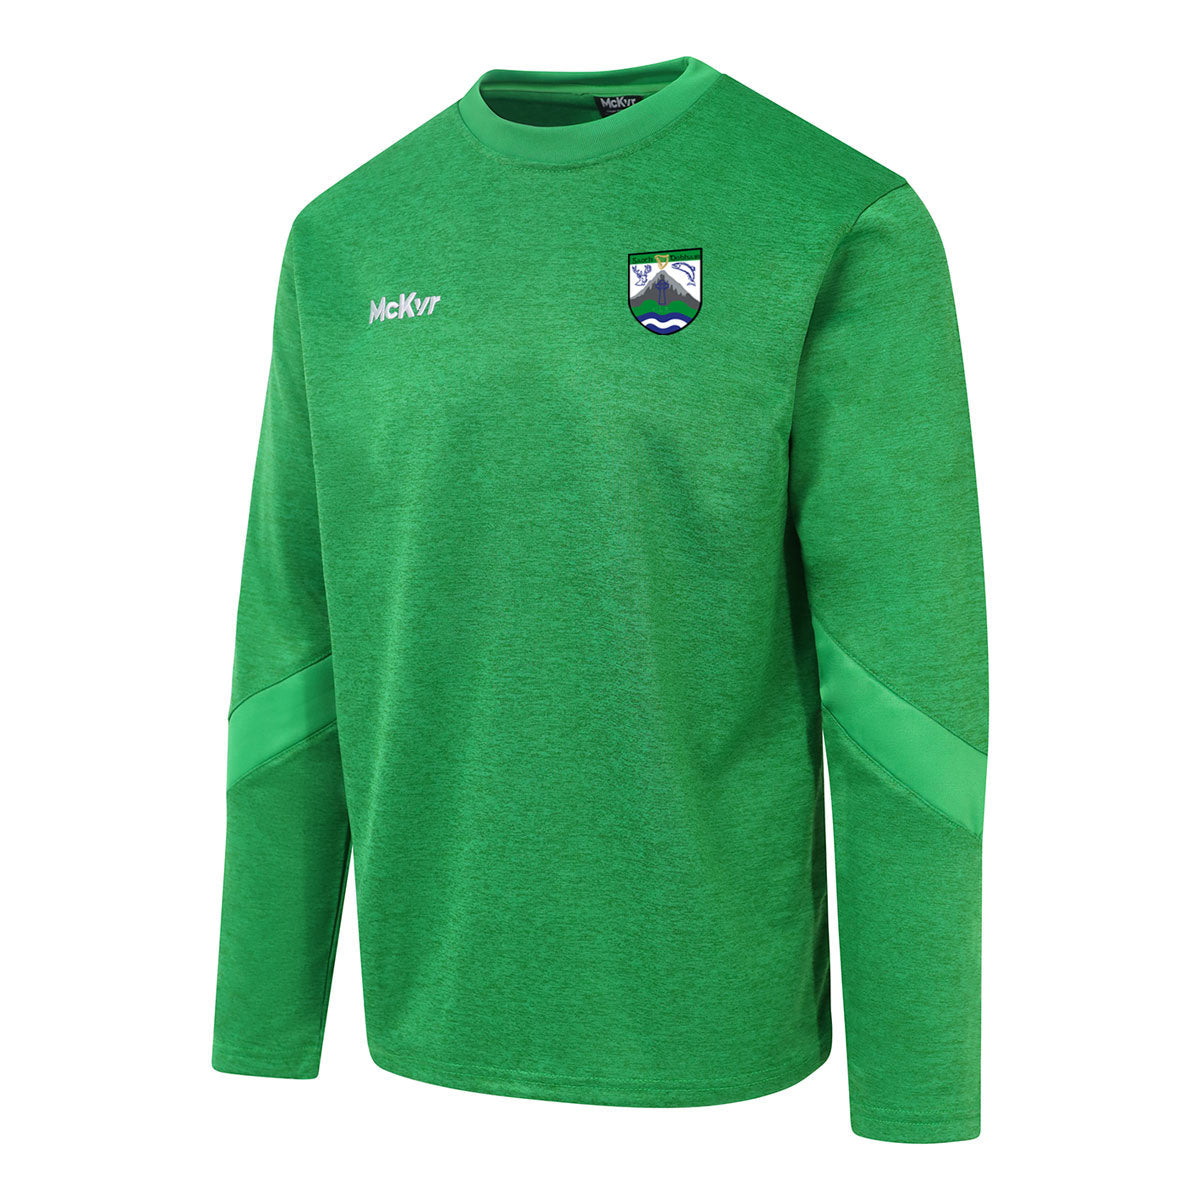 Mc Keever CLG Ghaoth Dobhair Core 22 Sweat Top - Youth - Green